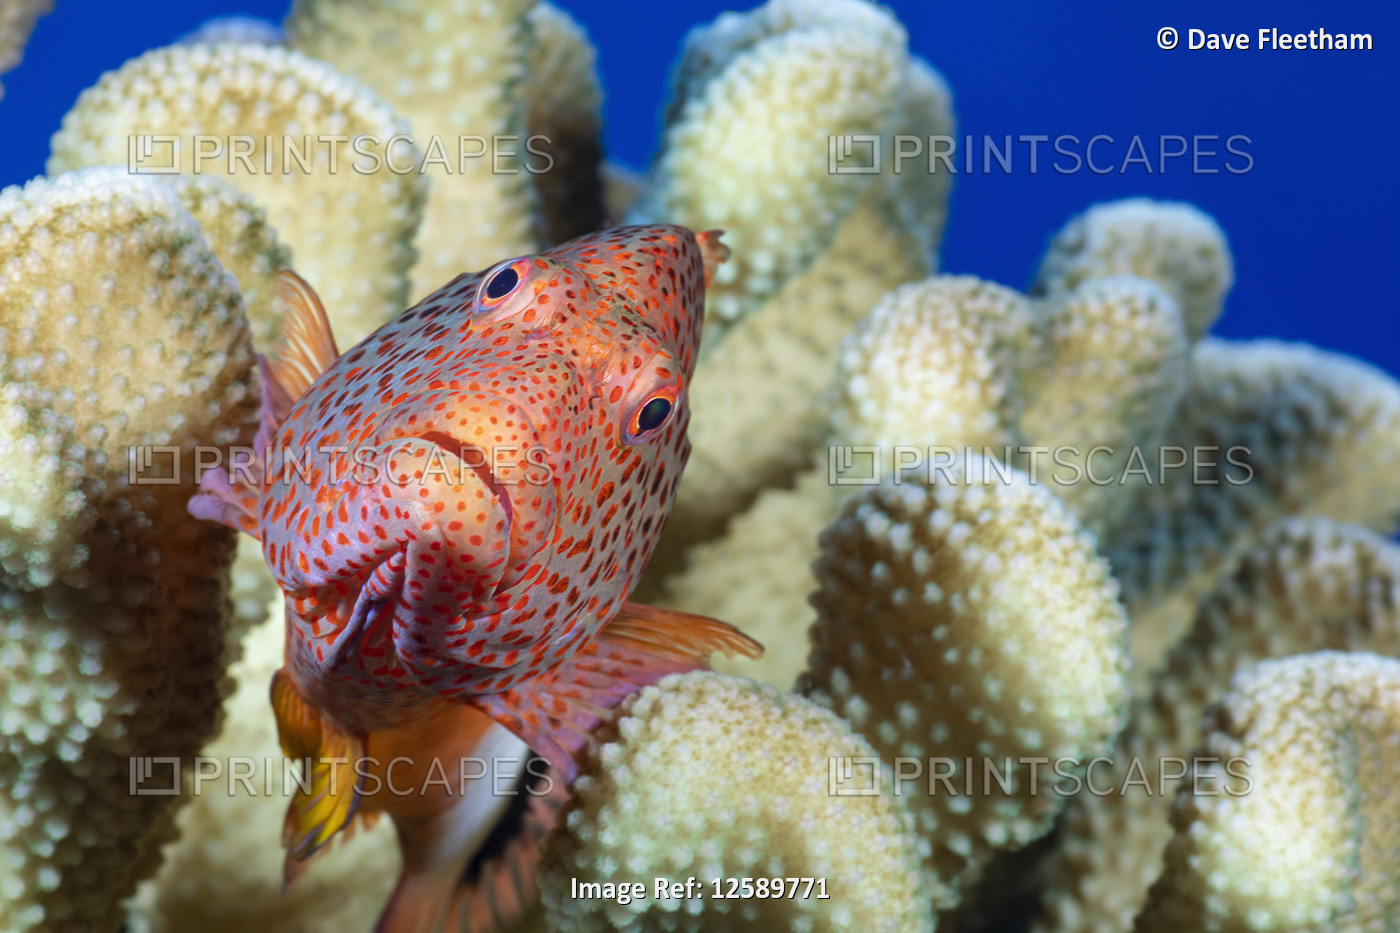 Typical of this family the Blackside hawkfish (Paracirrhites forsteri) has ...